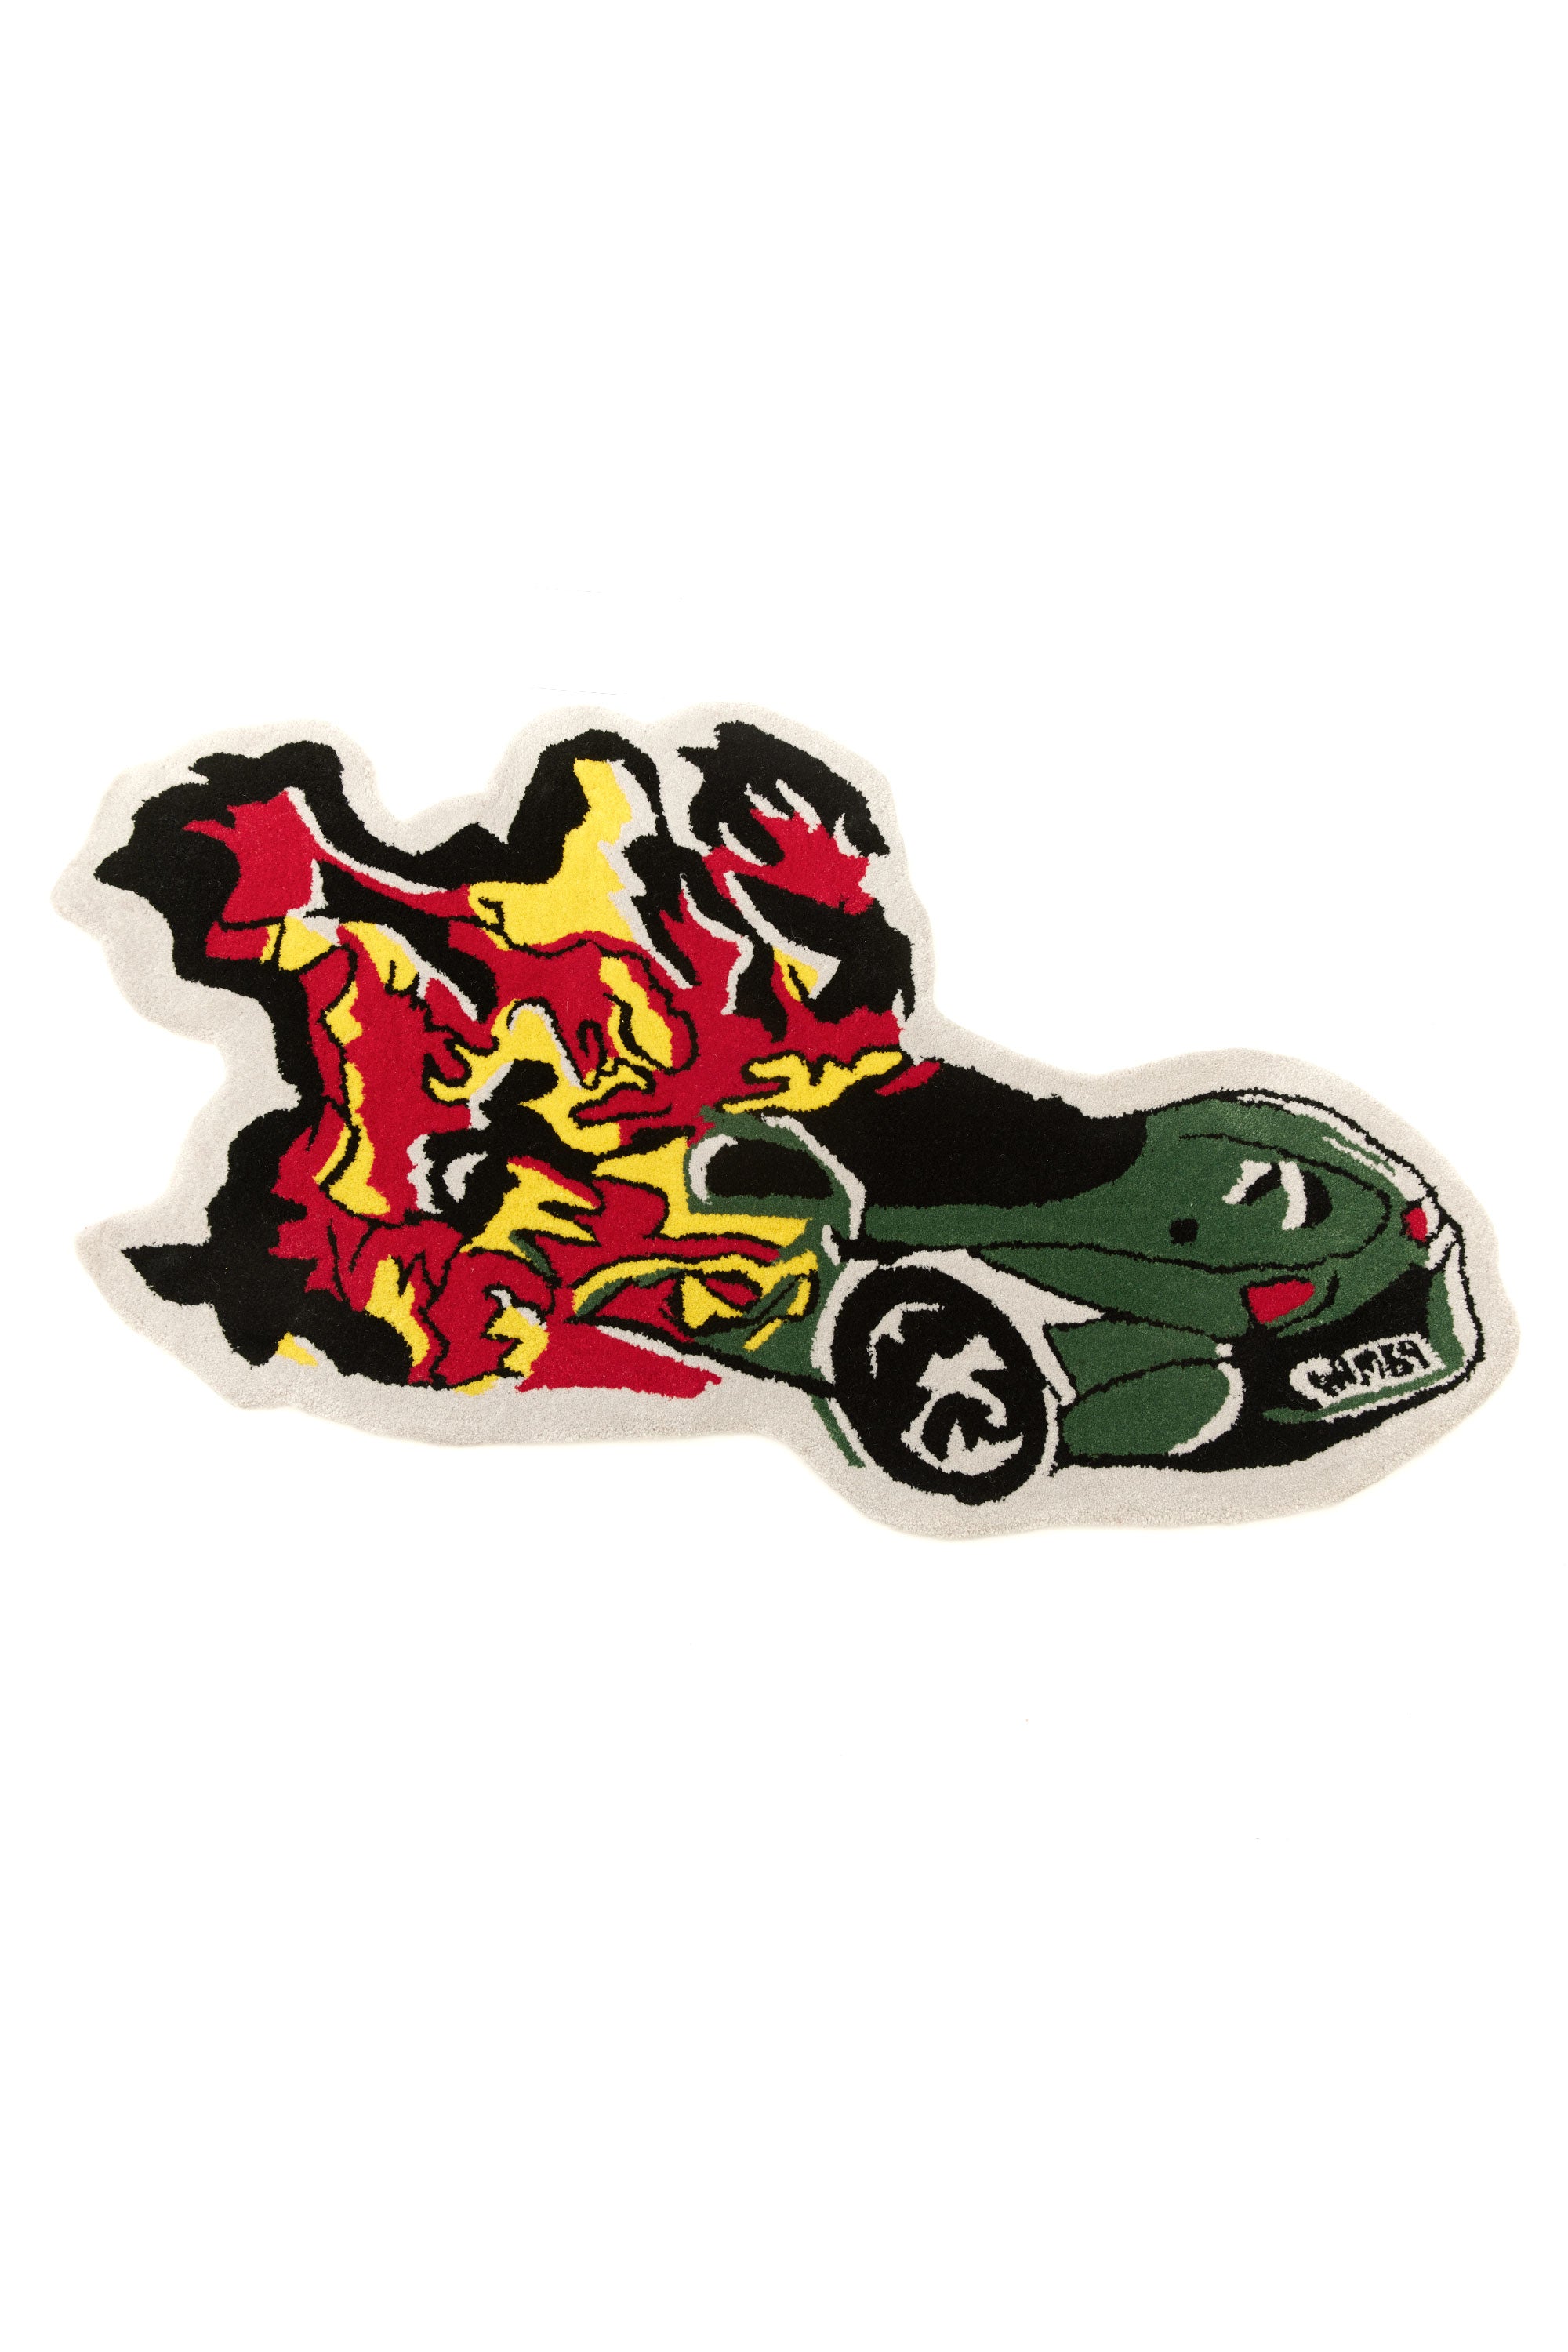 The BURNING CARS RUG  available online with global shipping, and in PAM Stores Melbourne and Sydney.